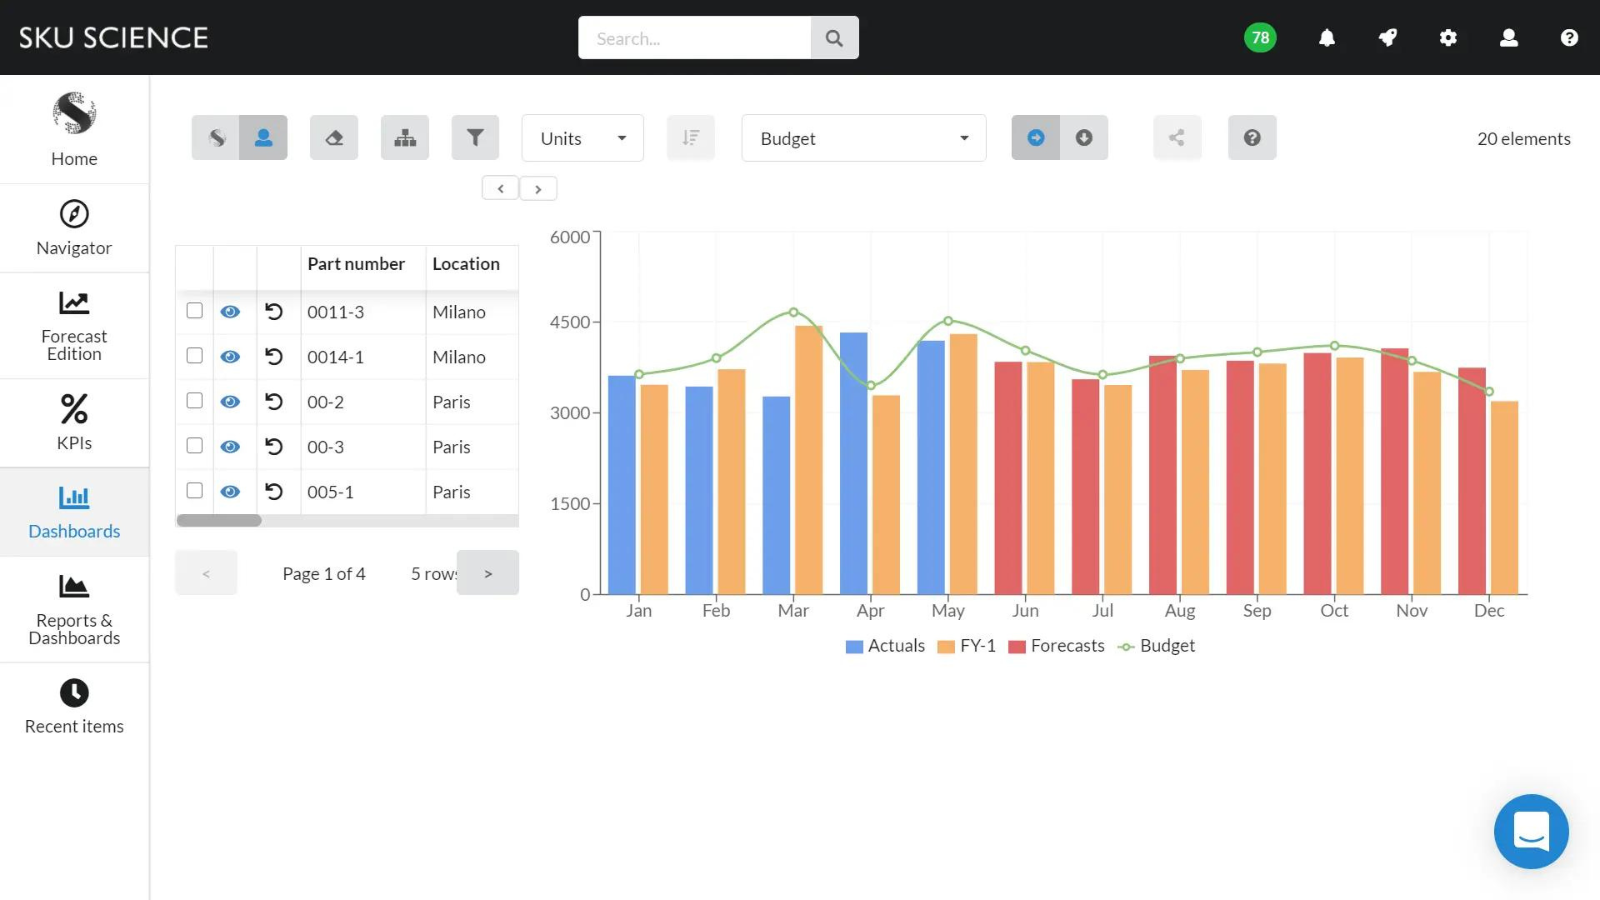 Dashboard with forecasts and annual budget